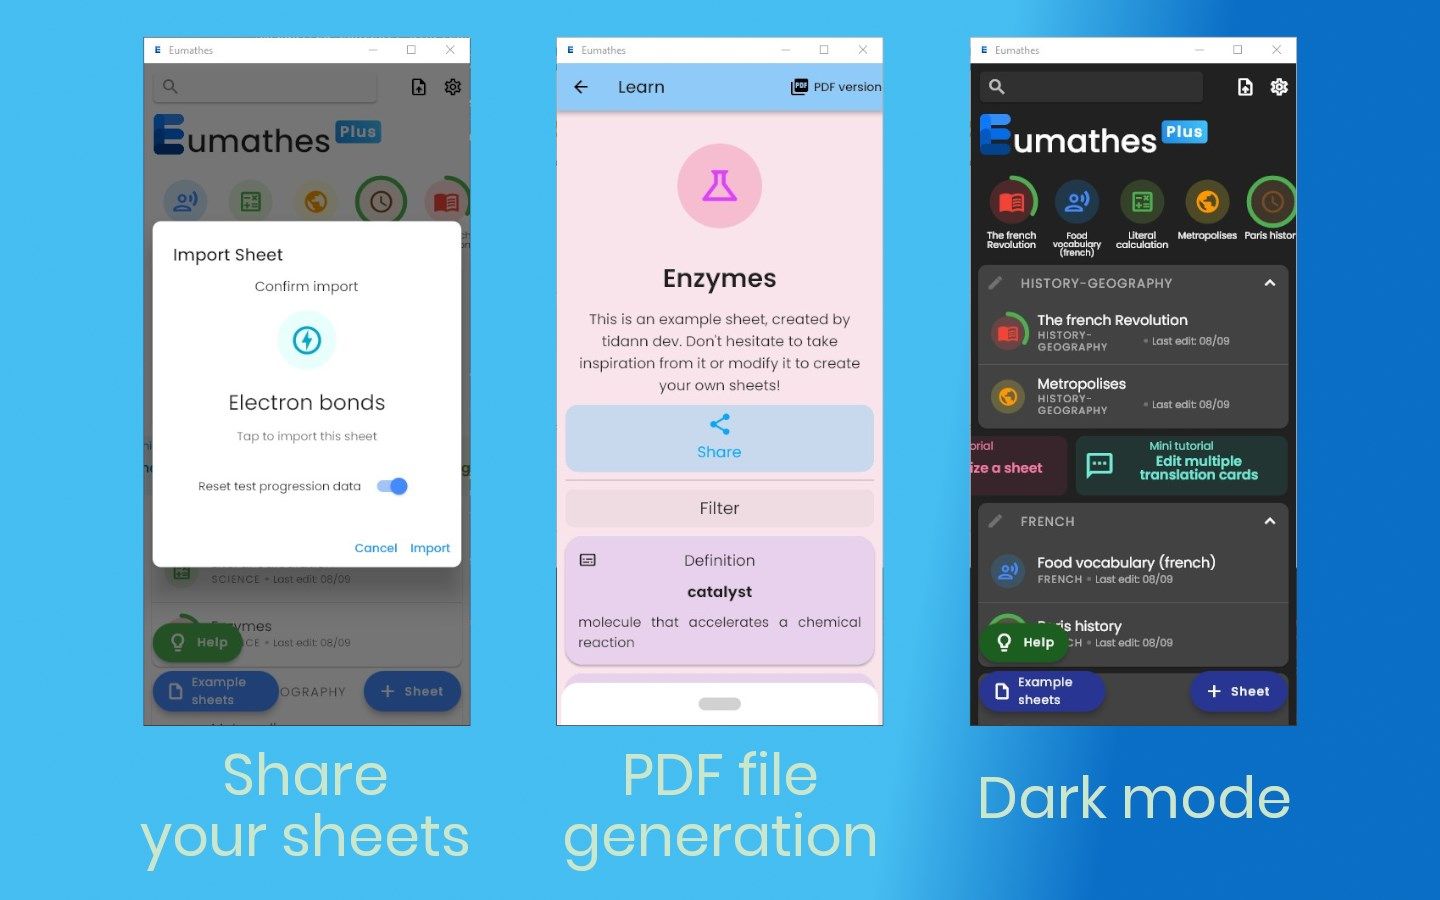 Share your sheets
PDF file generation
Dark mode